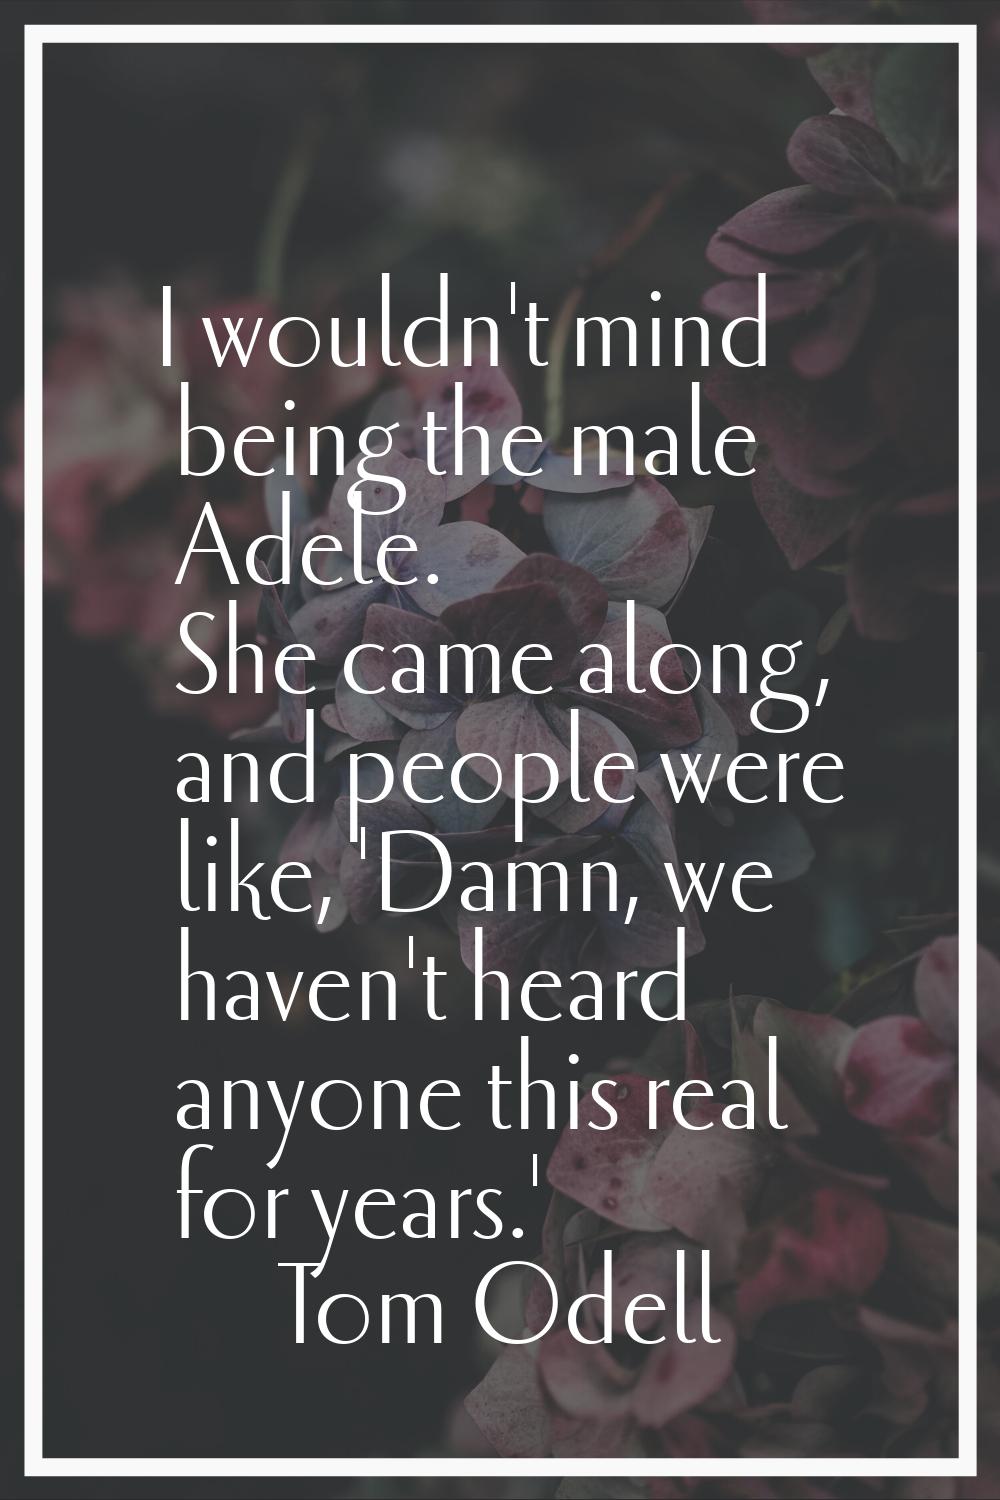 I wouldn't mind being the male Adele. She came along, and people were like, 'Damn, we haven't heard